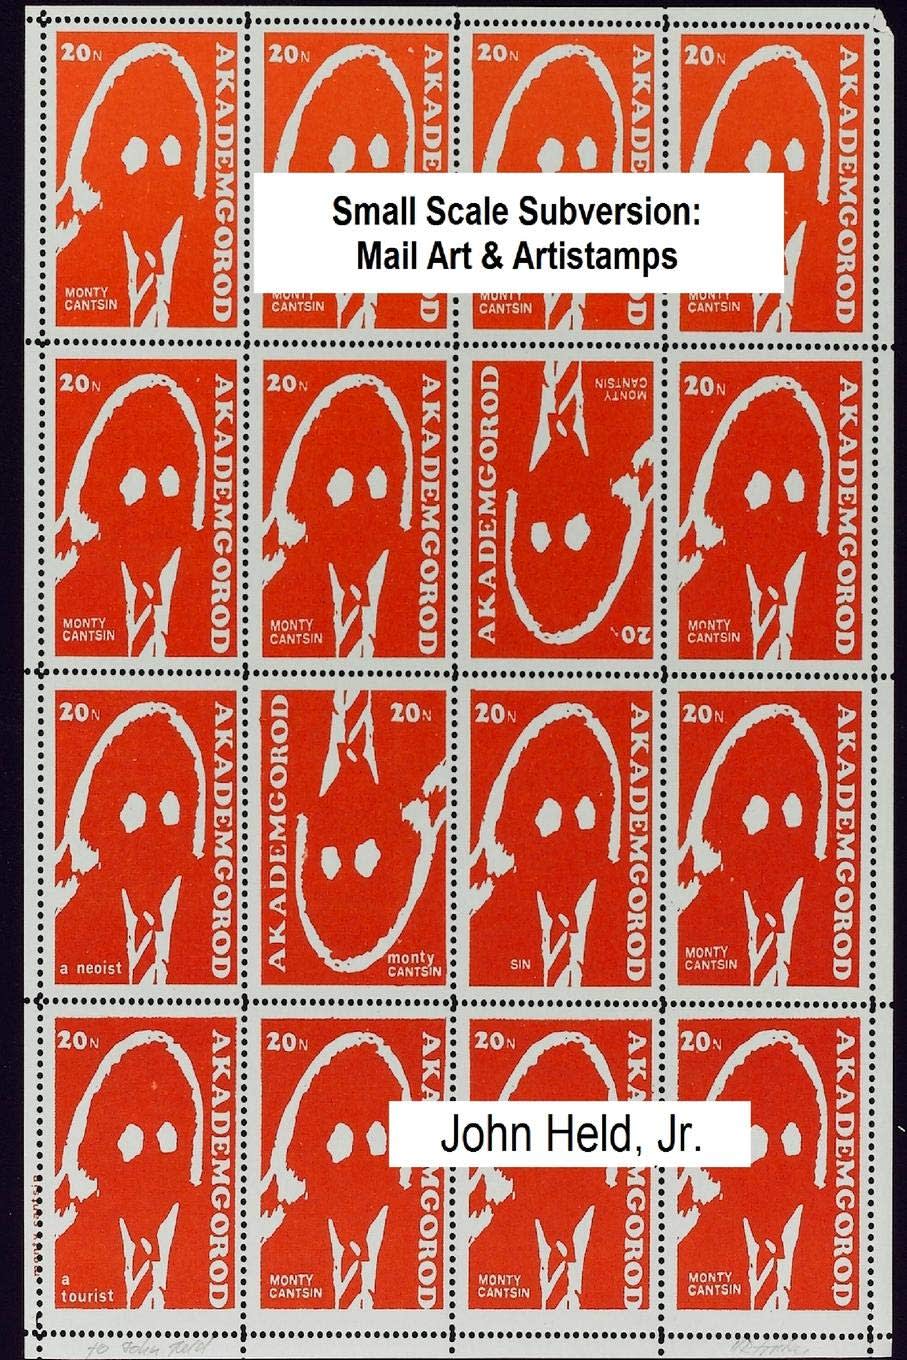  John Held Jr., Small Scale Subversion: Mail Art & Artistamps , Cover by H.R. Fricker 